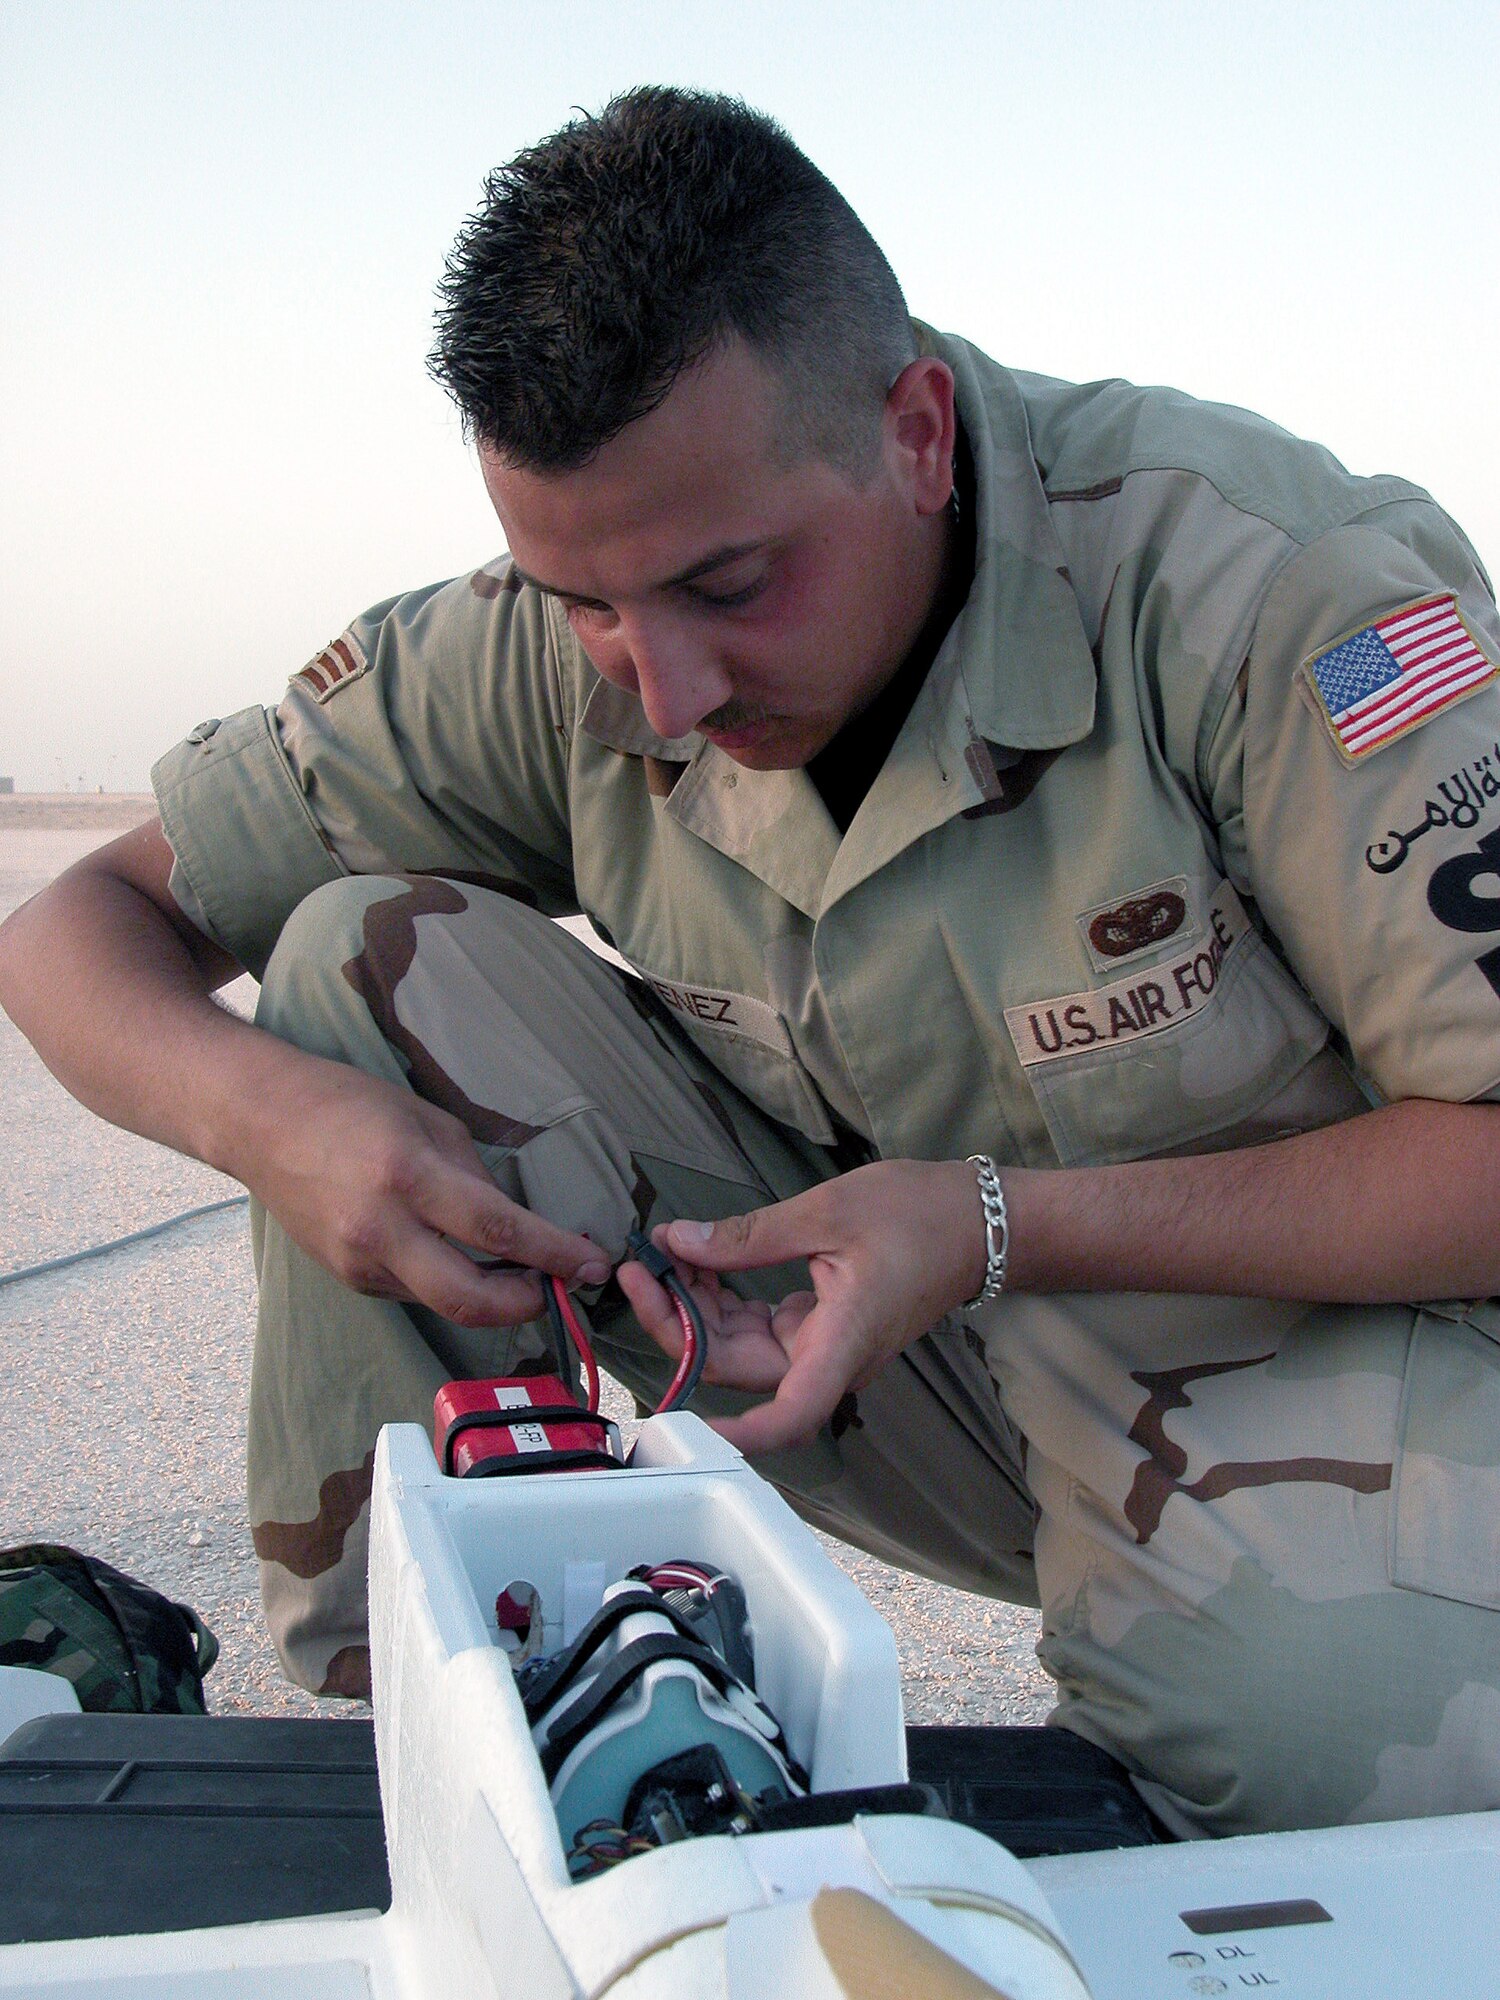 SOUTHWEST ASIA -- Senior Airman Alexander Jimenez changes the battery in a Desert Hawk unmanned aerial vehicle.  He is assigned to the 379th Security Forces Squadron's airborne surveillance program and is deployed from Spangdahlem Air Base, Germany.  (U.S. Air Force photo by Staff Sgt. C. Todd Lopez)  